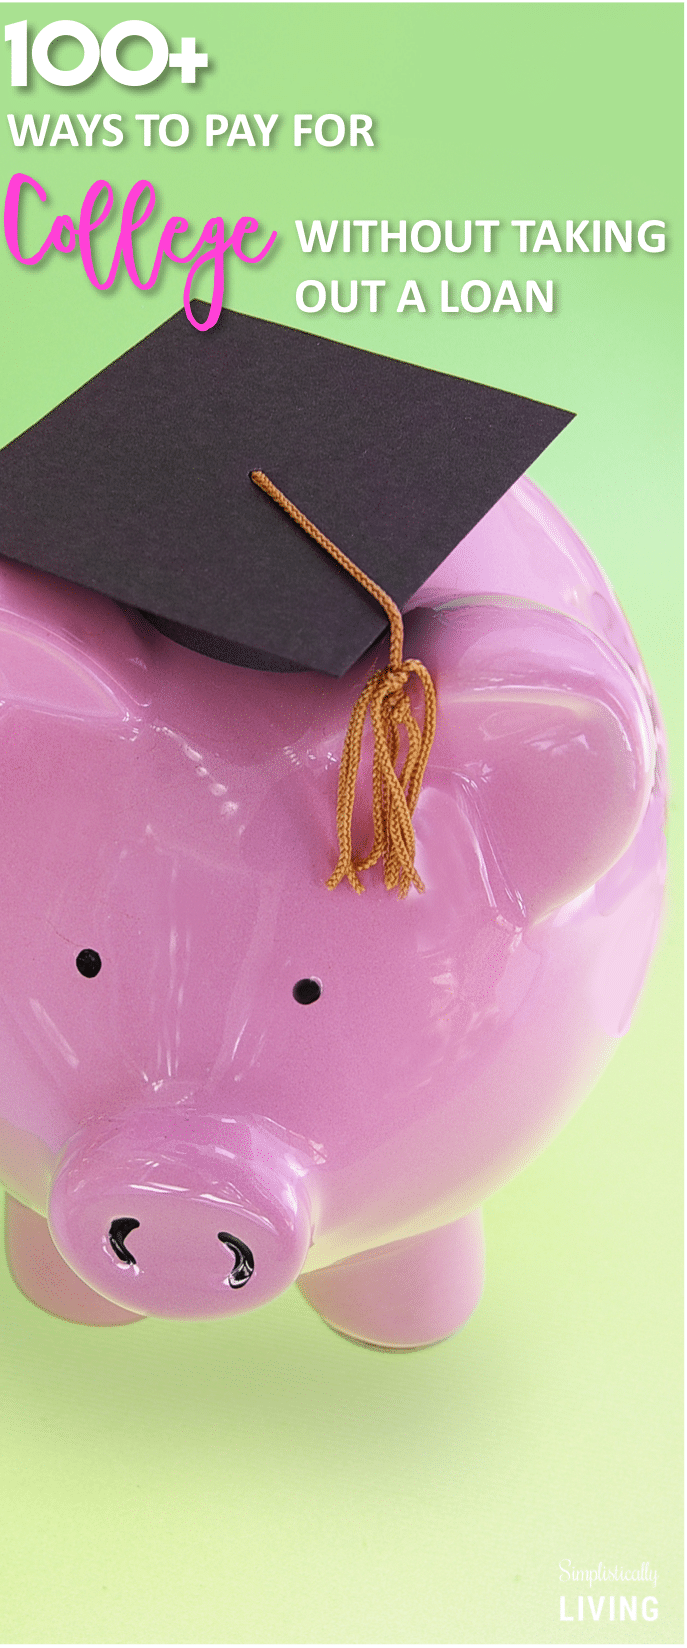 100+ Ways to Pay for College Without Taking Out a Loan #college #collegeloans #waystopayforcollege #payforcollege #collegetuition #debtfree